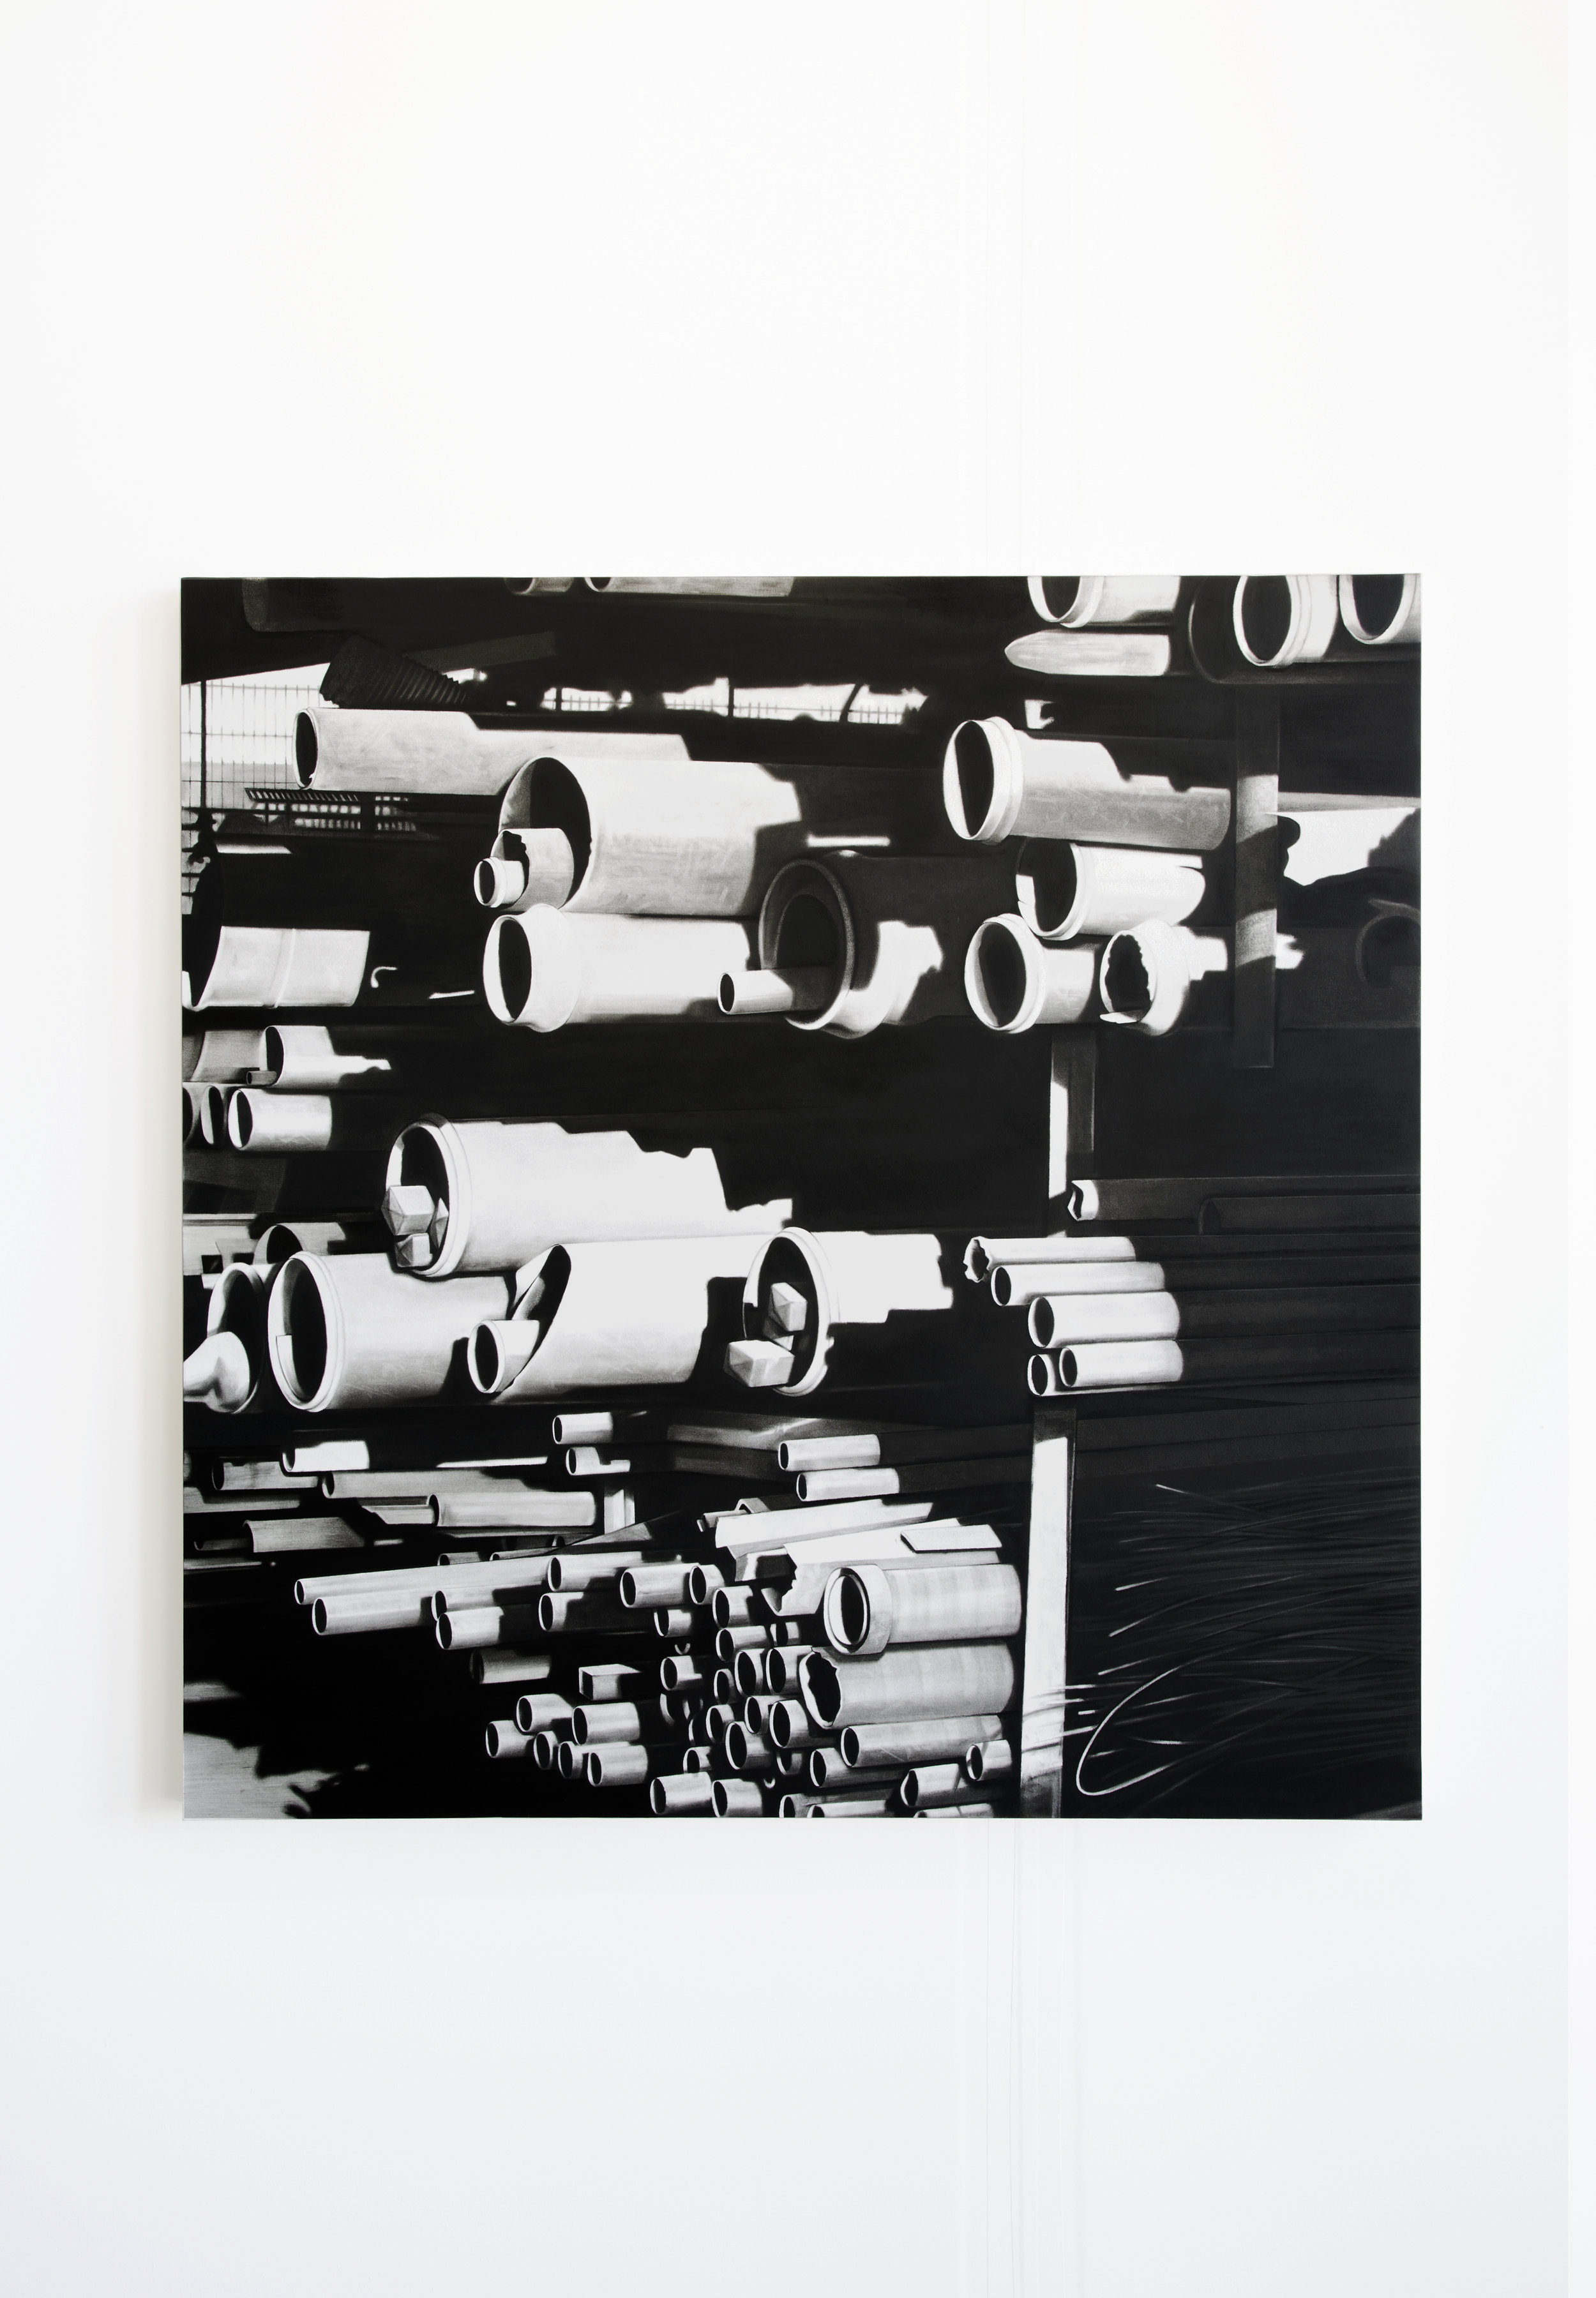    Tubular Bells  ,  charcoal and oil on paper mounted on wood , 120x120 cm   2018  